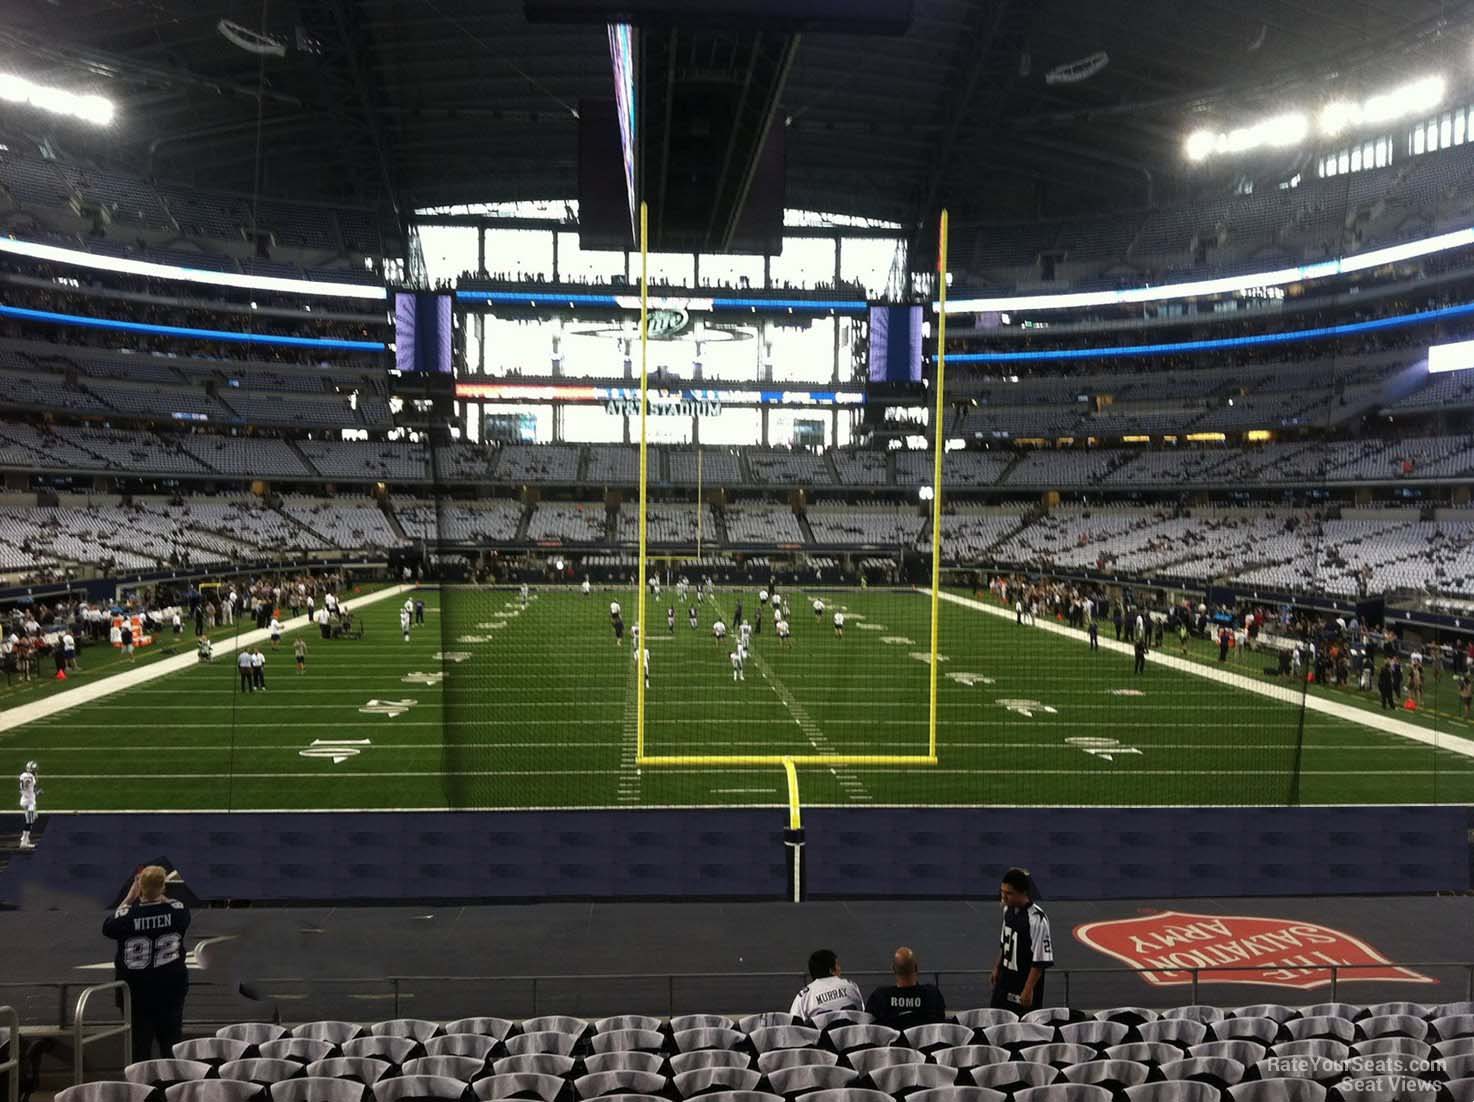 section 148, row 20 seat view  for football - at&t stadium (cowboys stadium)